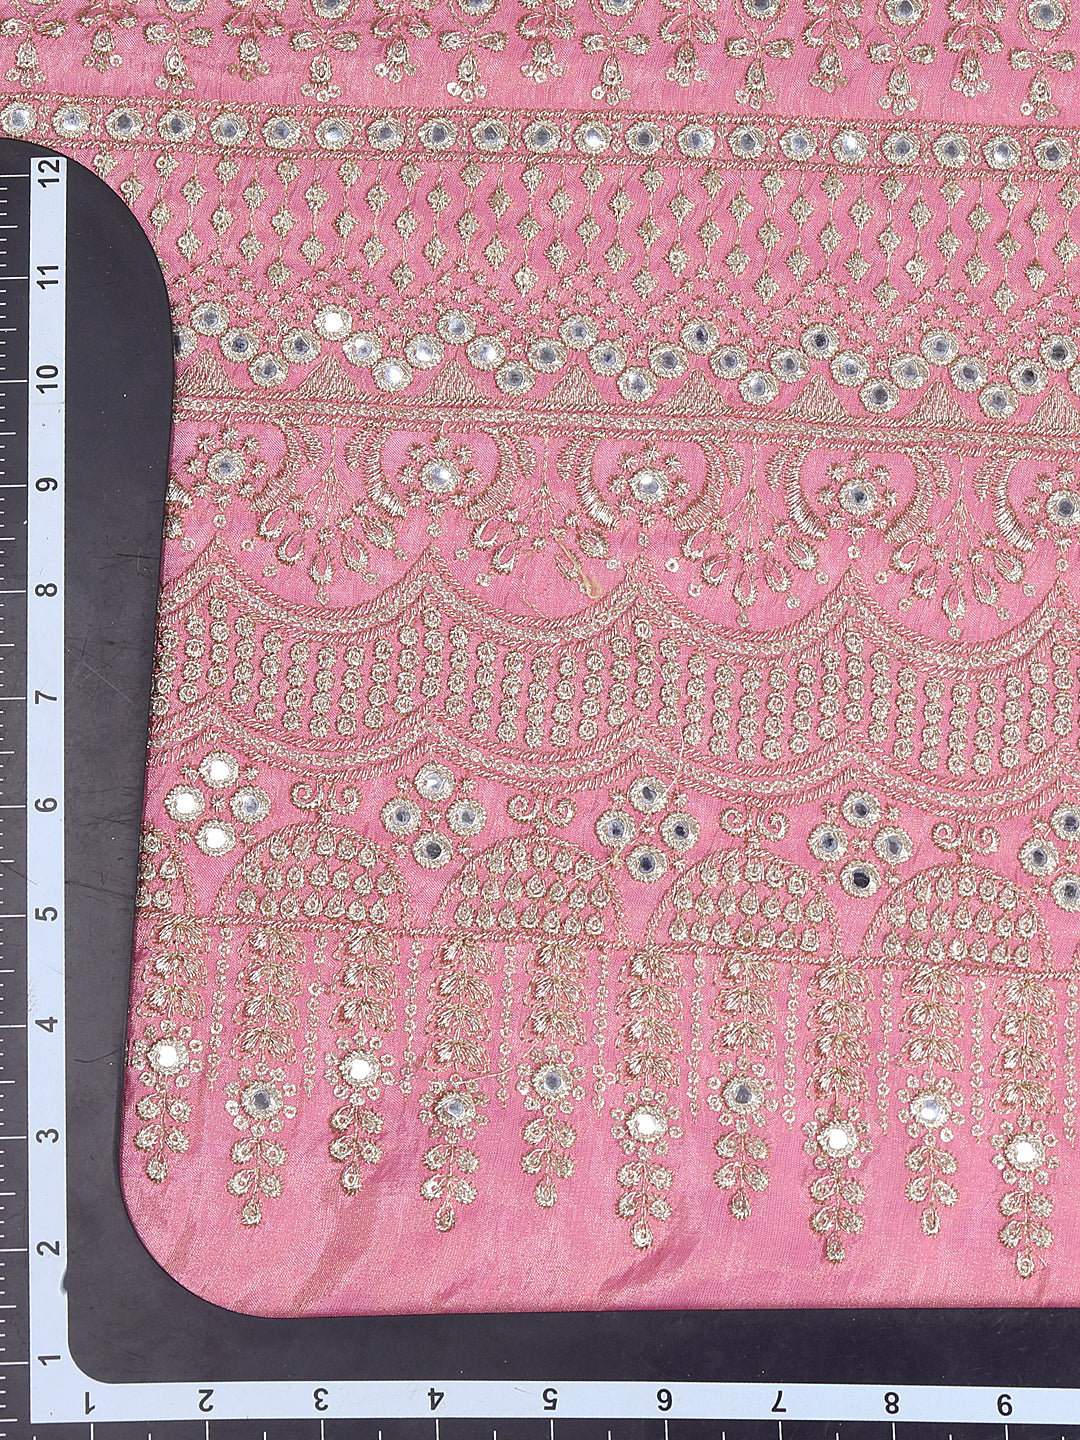 Pink Border Worked Tissue Fabric